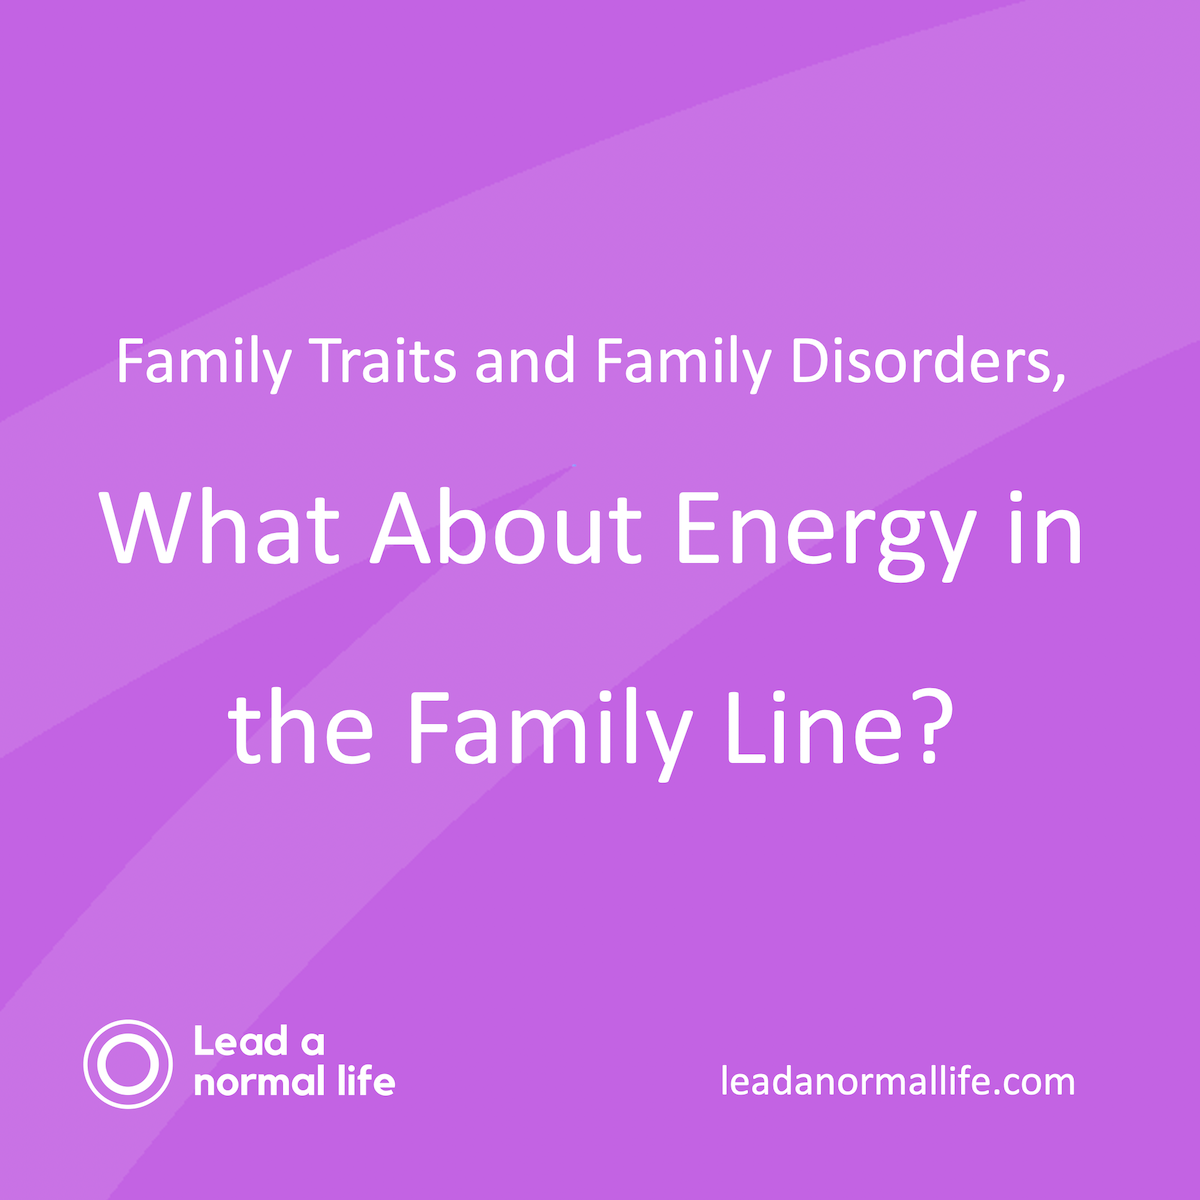 Family Traits and Family Disorders, What About Energy in the Family Line? Lead a Normal Life